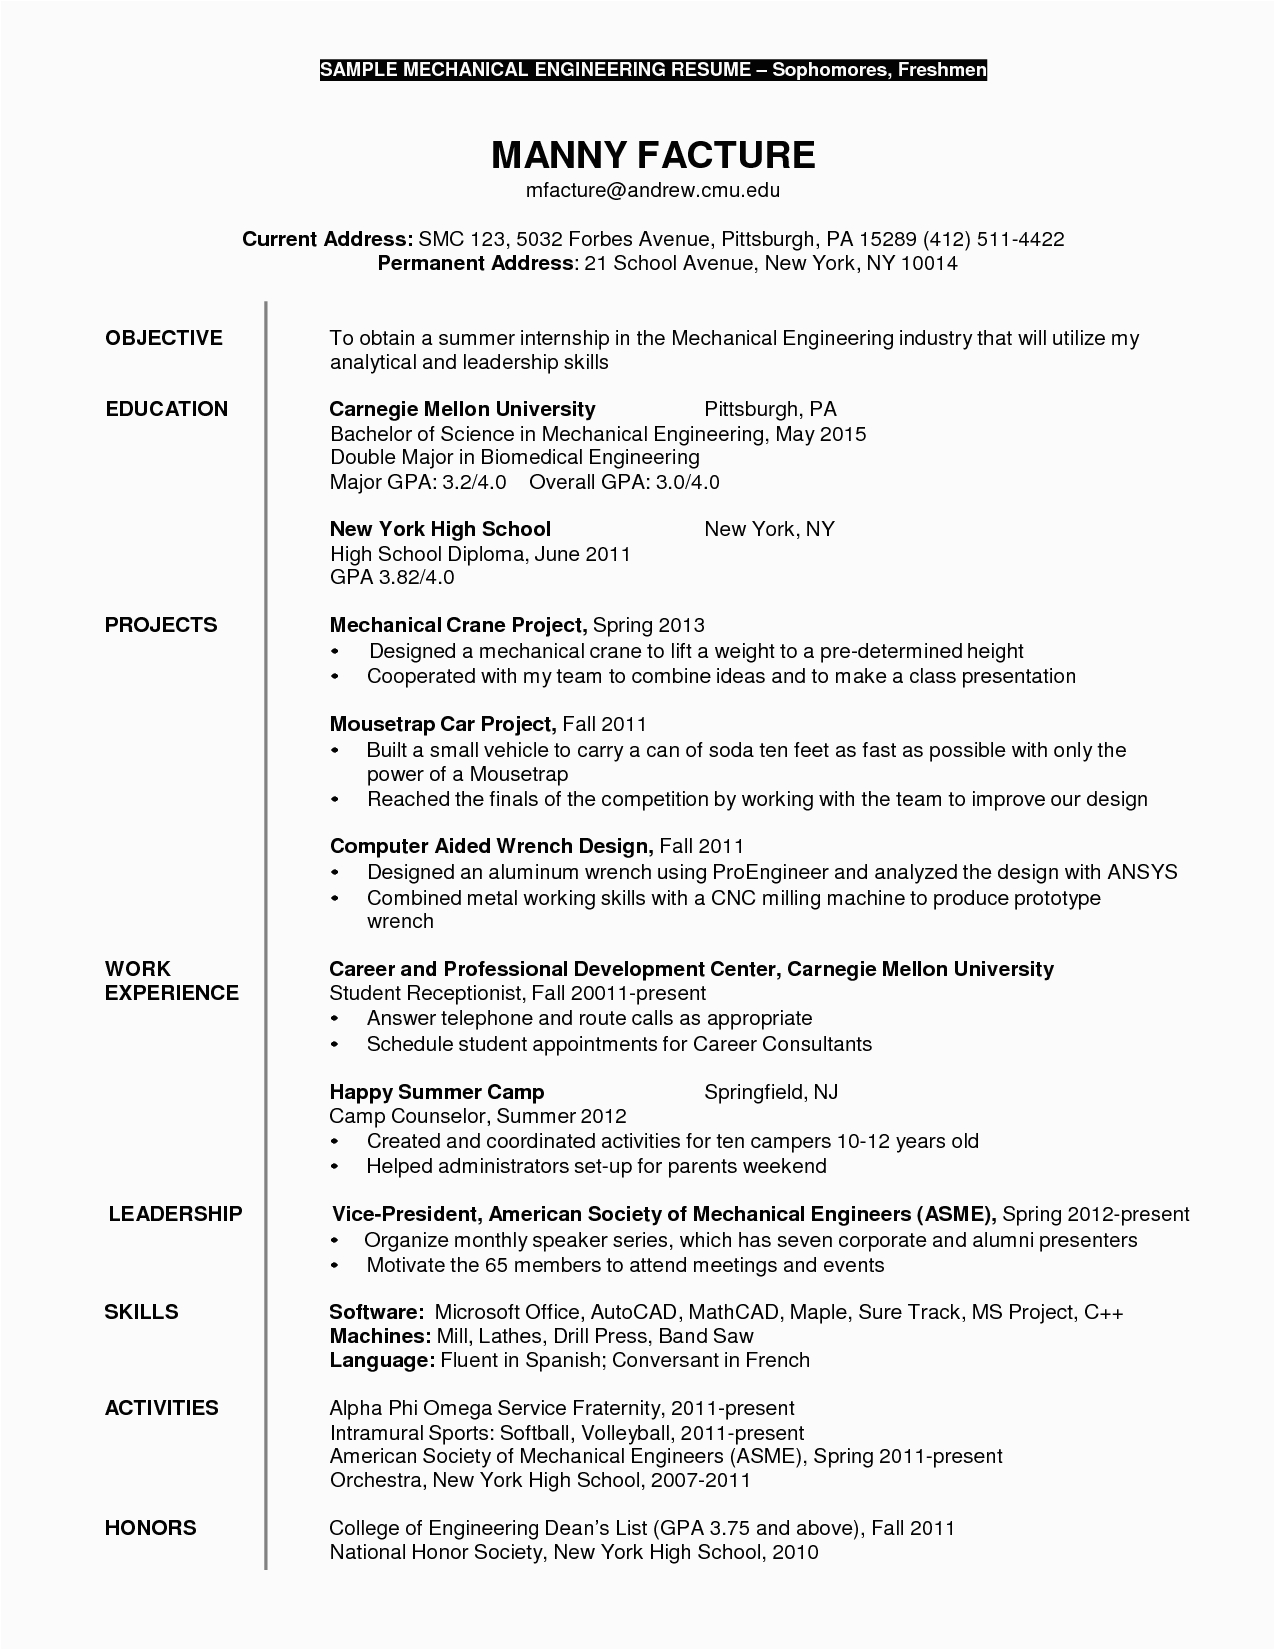 Sample Engineering Student Resume for Internship Mechanical Engineering Internship Resume Sle Sle